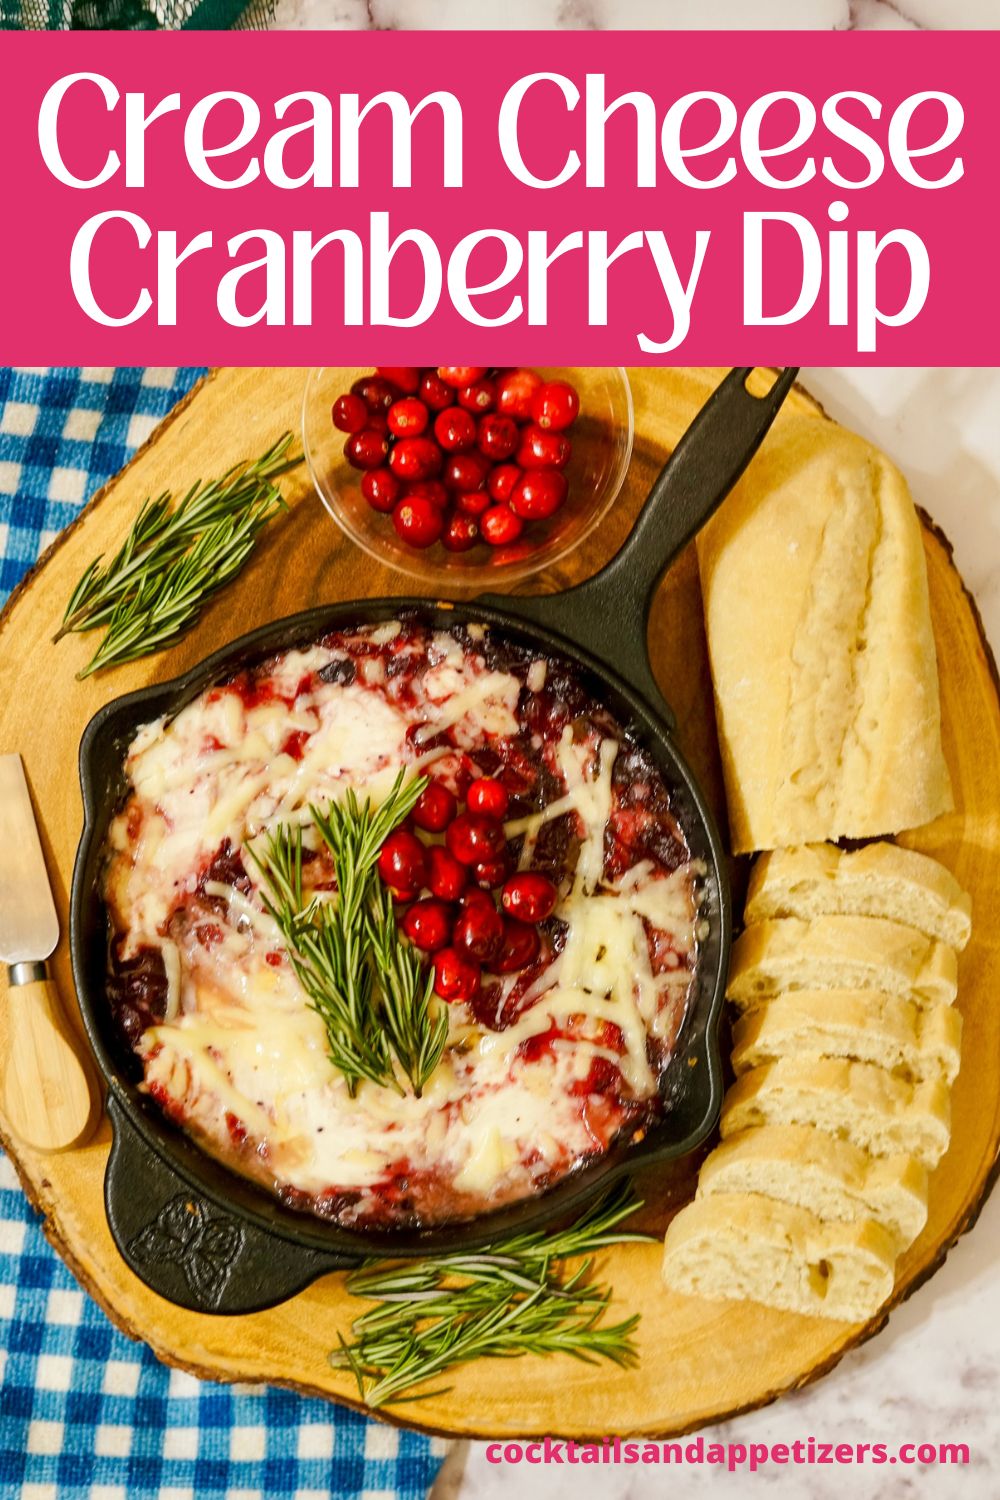 Cream Cheese Cranberry Dip in a skillet, along with bread for dipping.